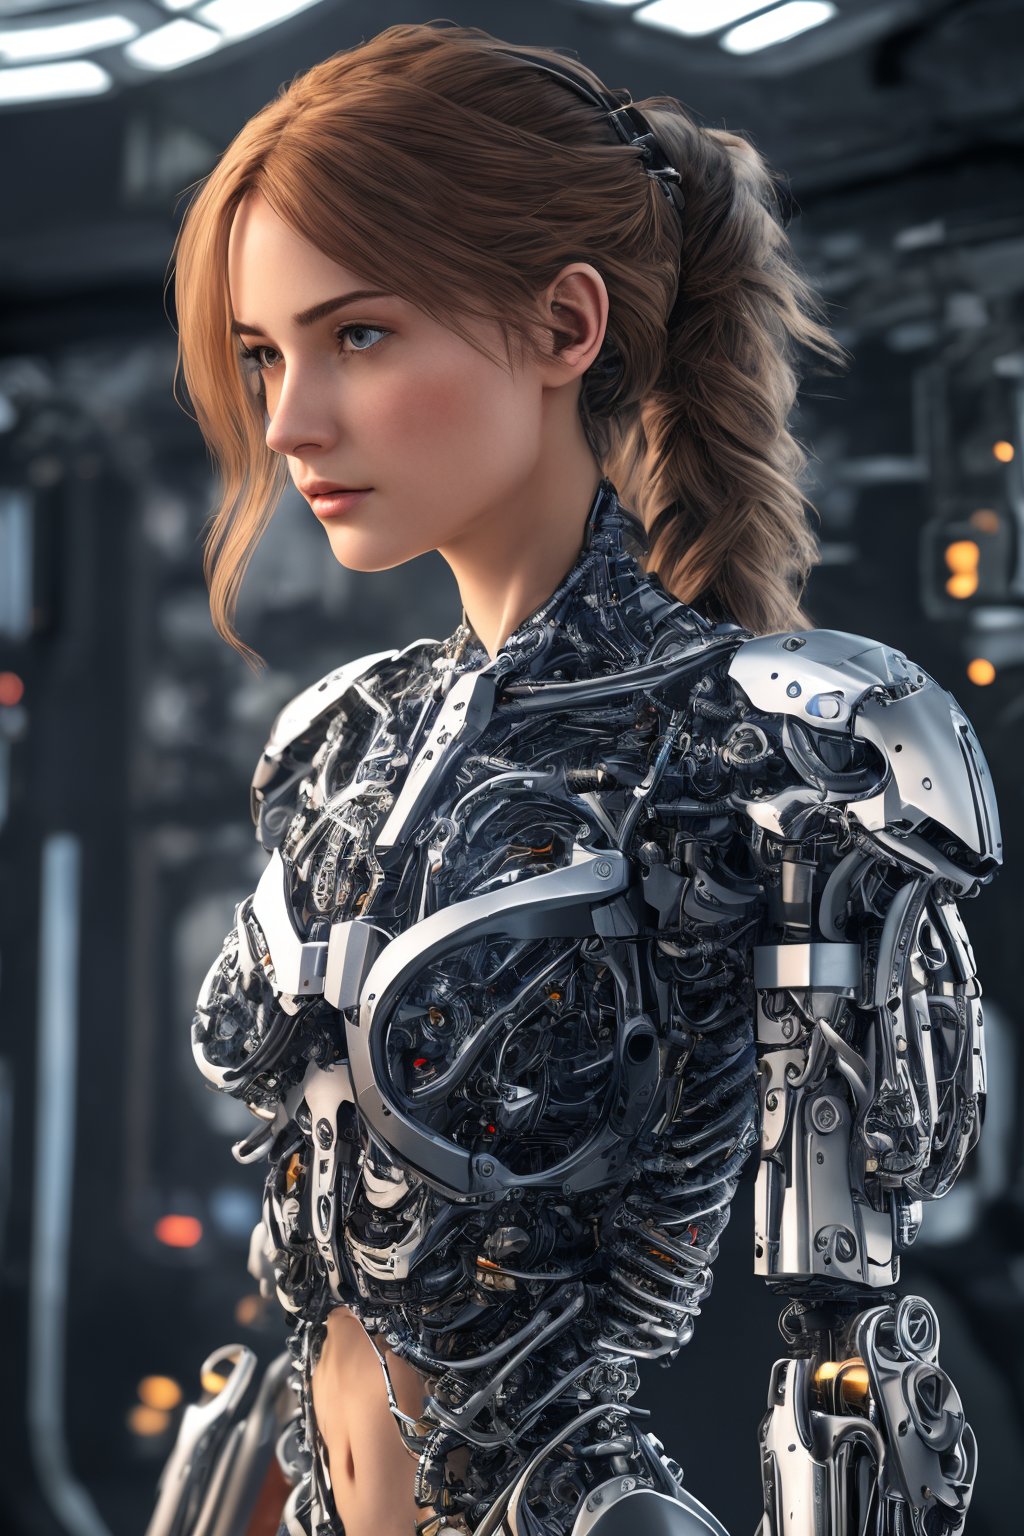 (best quality, 8K, highres, masterpiece),  hyper-detailed,  (photo-realistic,  lifelike) medium shot of a semi-cyborg female with biomechanical arms. The cinematic lighting accentuates the intricate details of her cybernetic limbs,  creating a visually stunning image that blurs the line between human and machine. This high-resolution masterpiece captures the essence of technological fusion and human beauty.